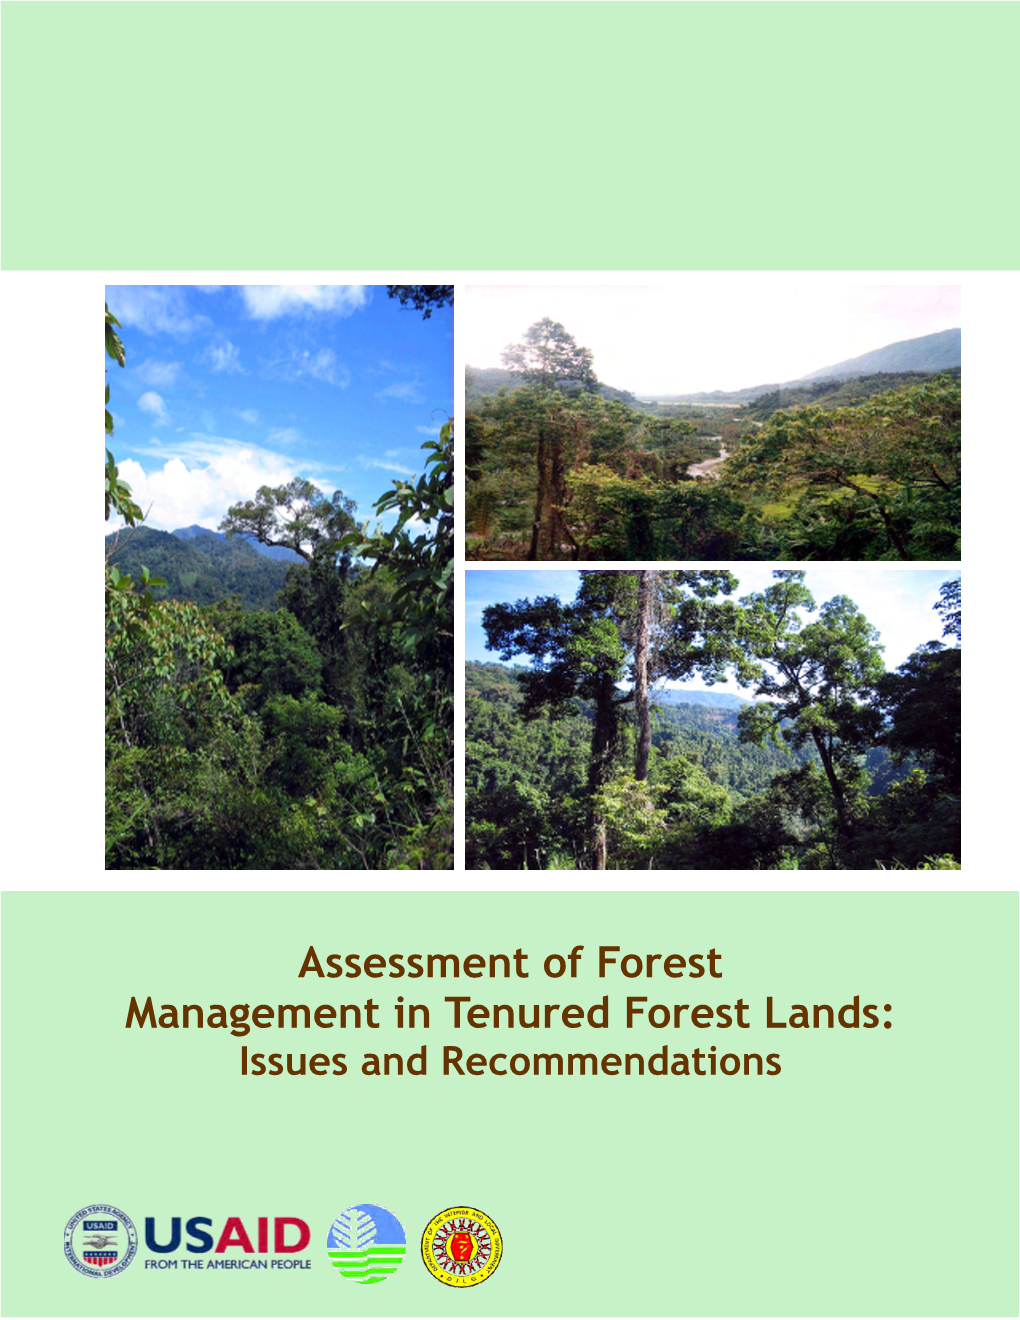 Assessment of Forest Management in Tenured Forest Lands: Issues and Recommendations